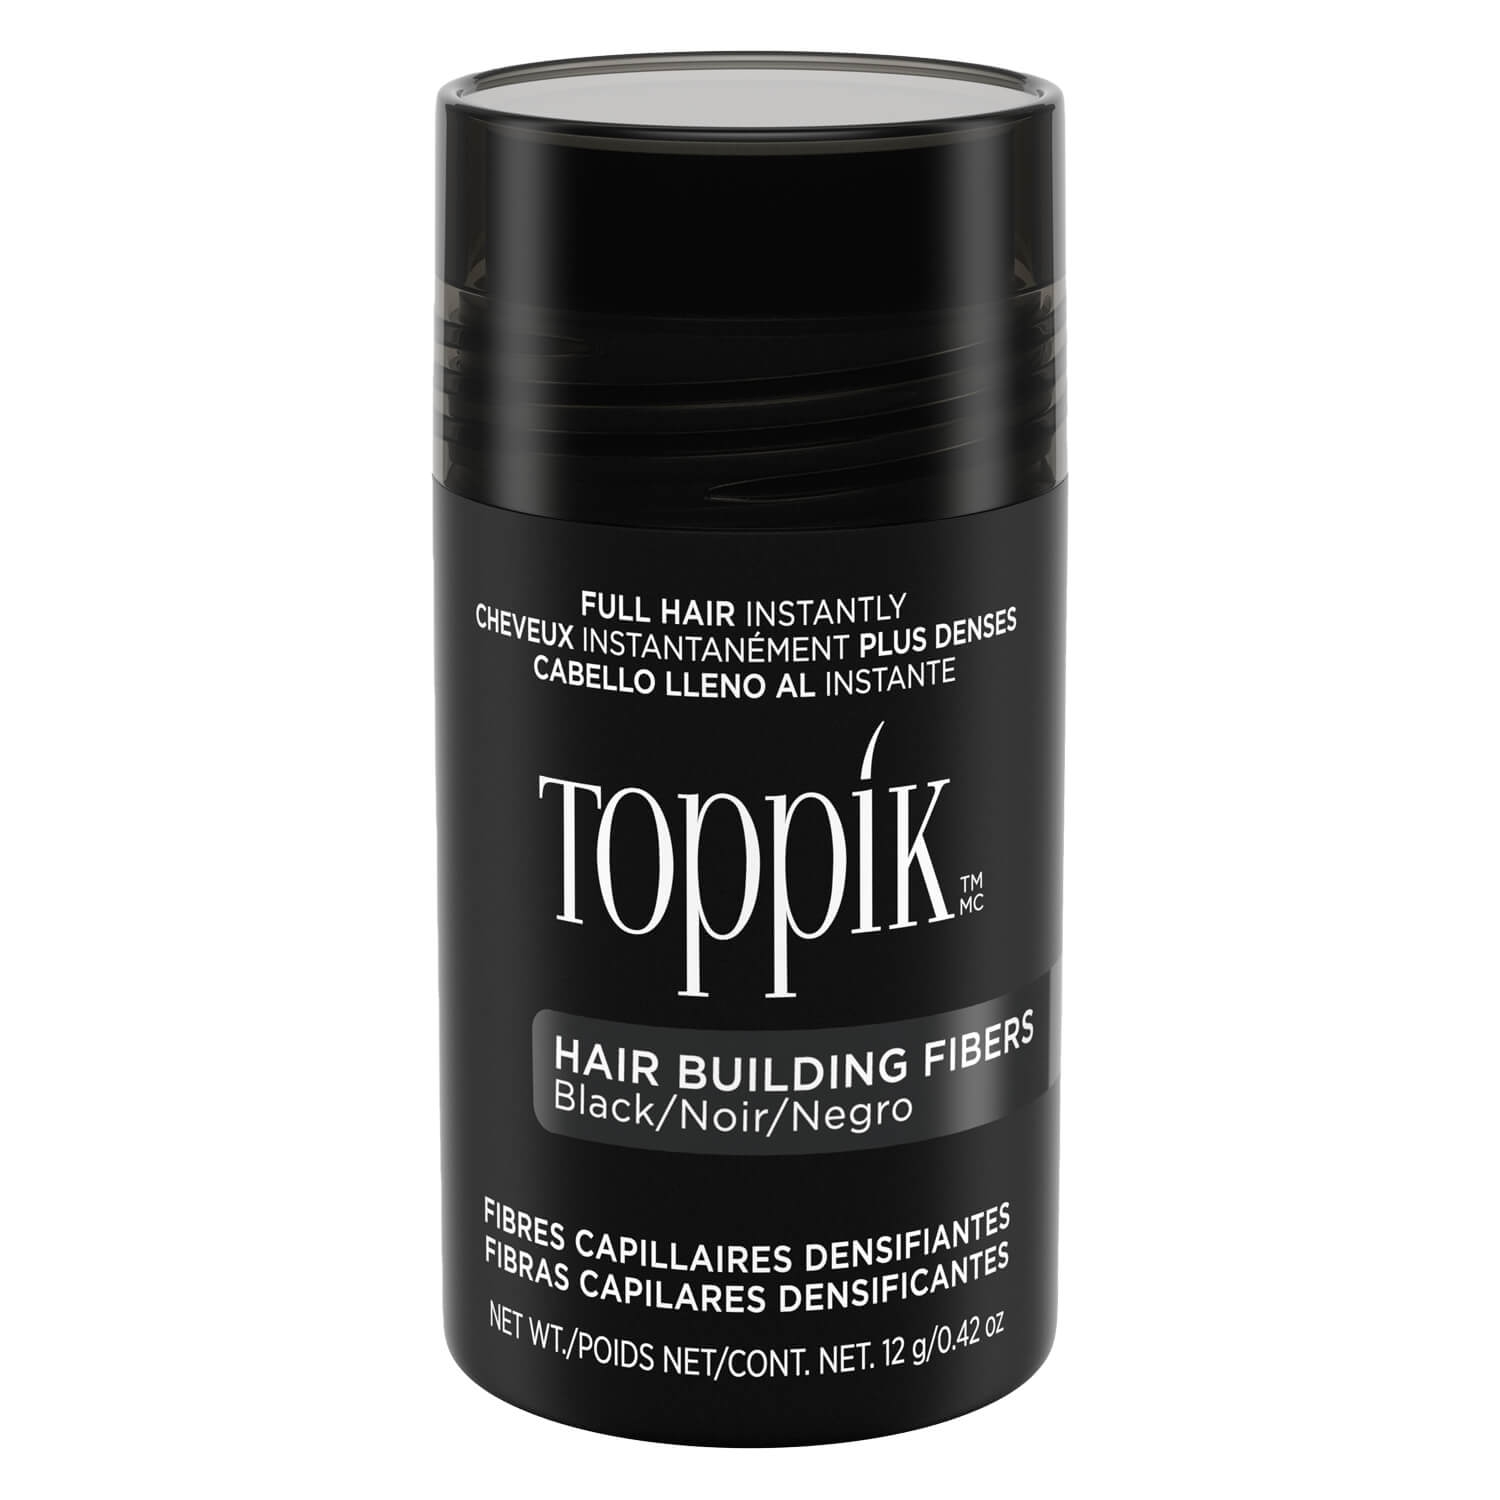 Product image from Toppik - Hair Building Fibers Black